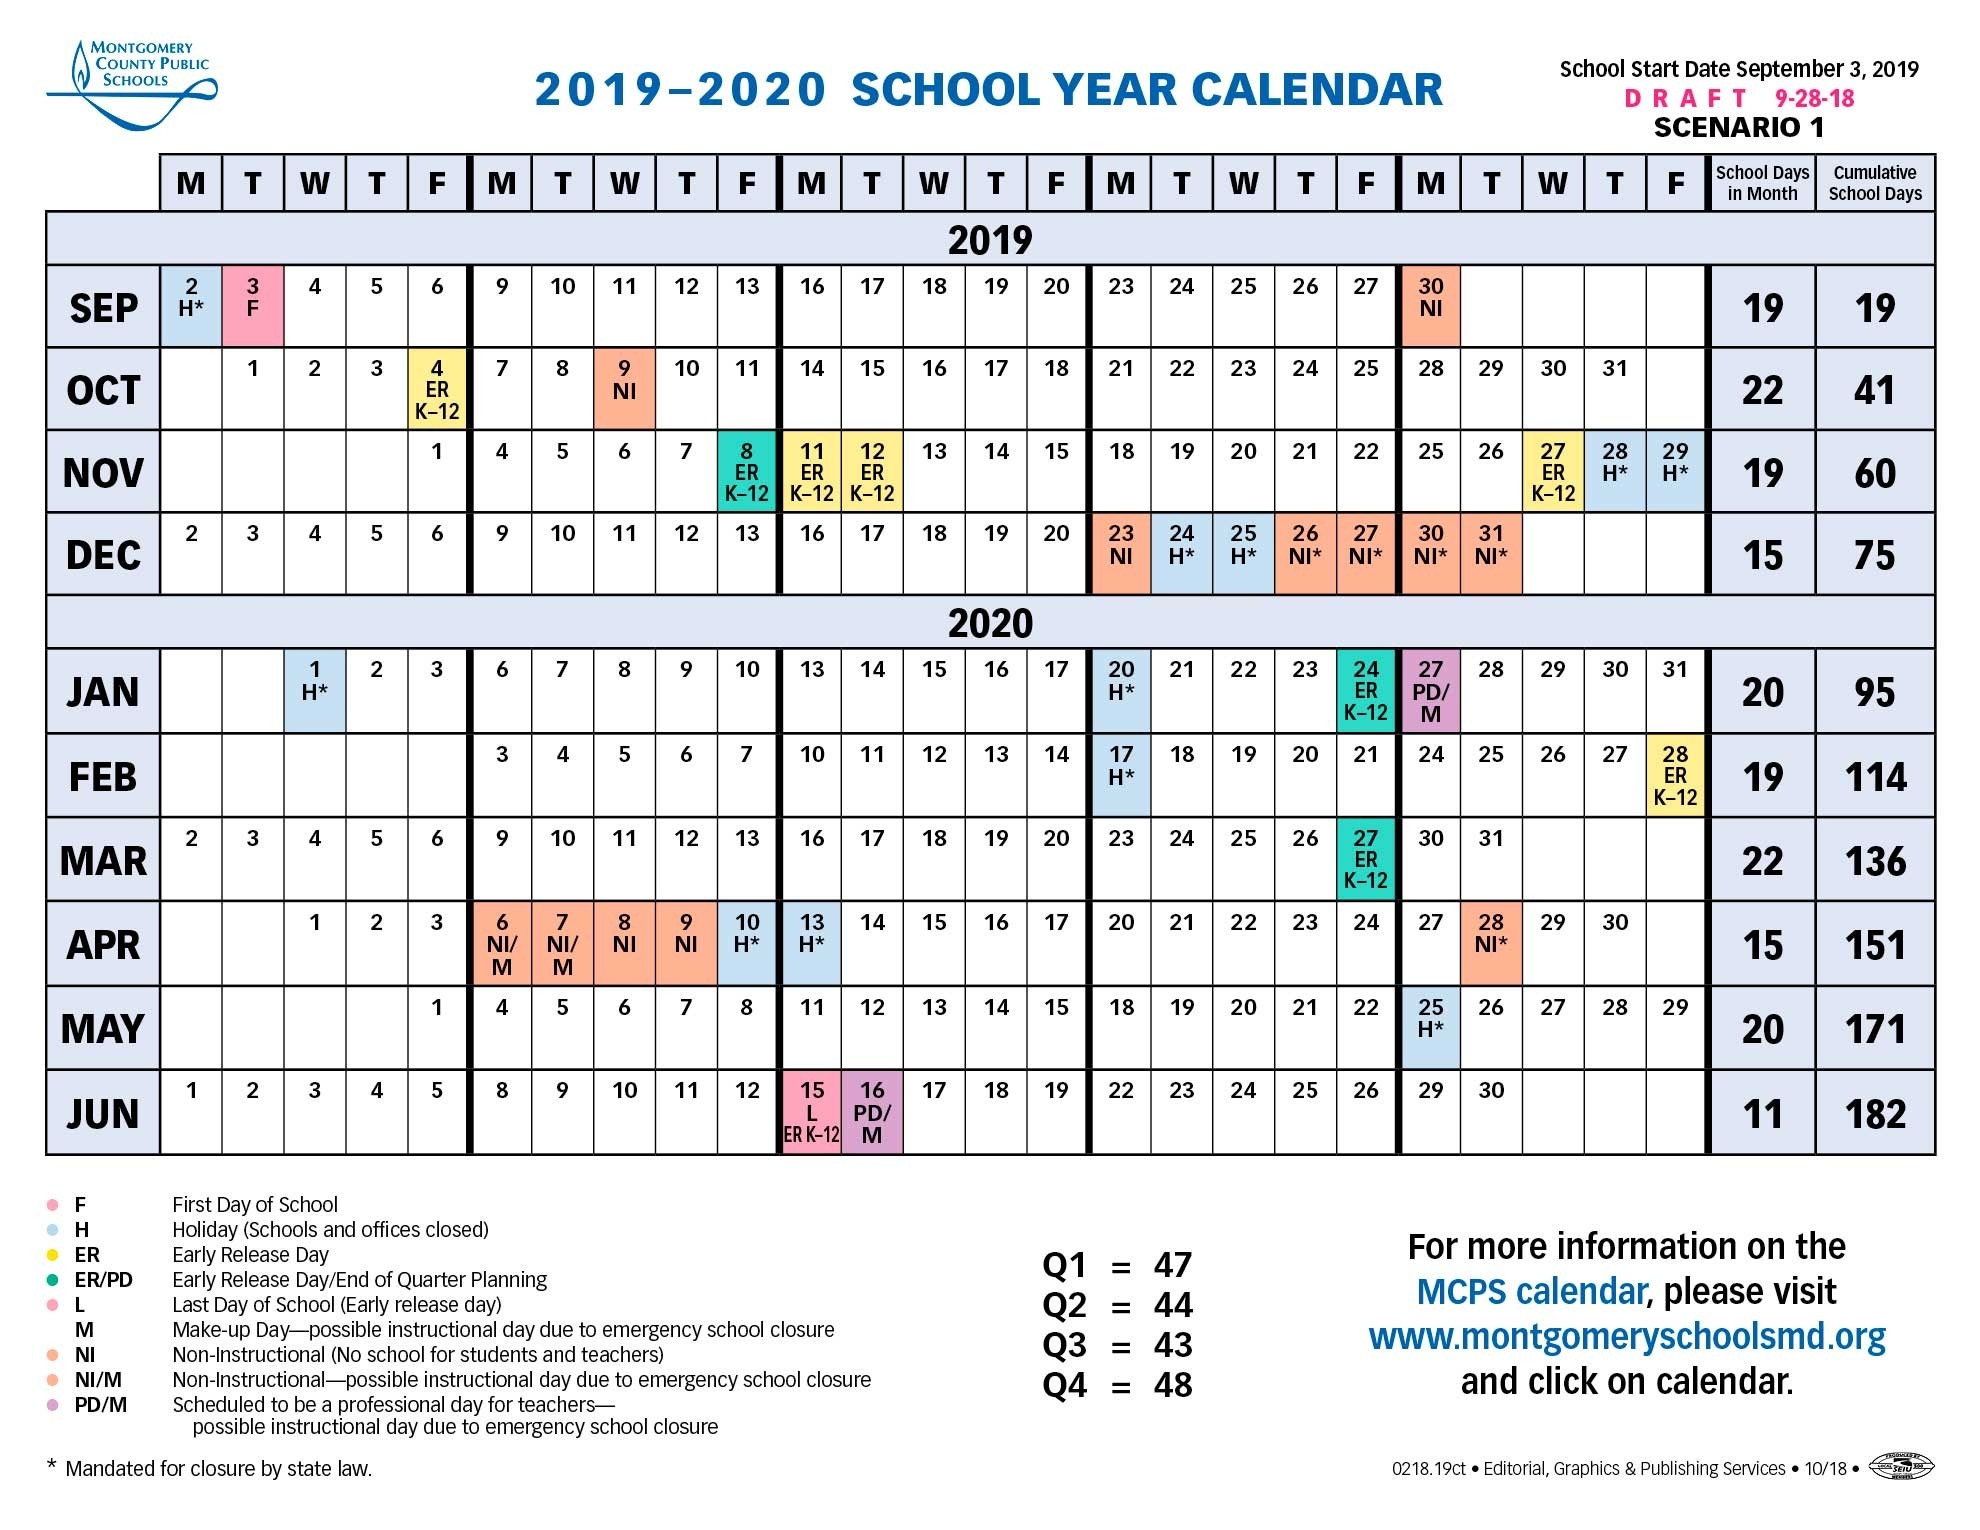 School Board Approves Longer Spring Break For 2019-2020-2020 Jewish Calendar With Jewish And Non-Jewish Holidays